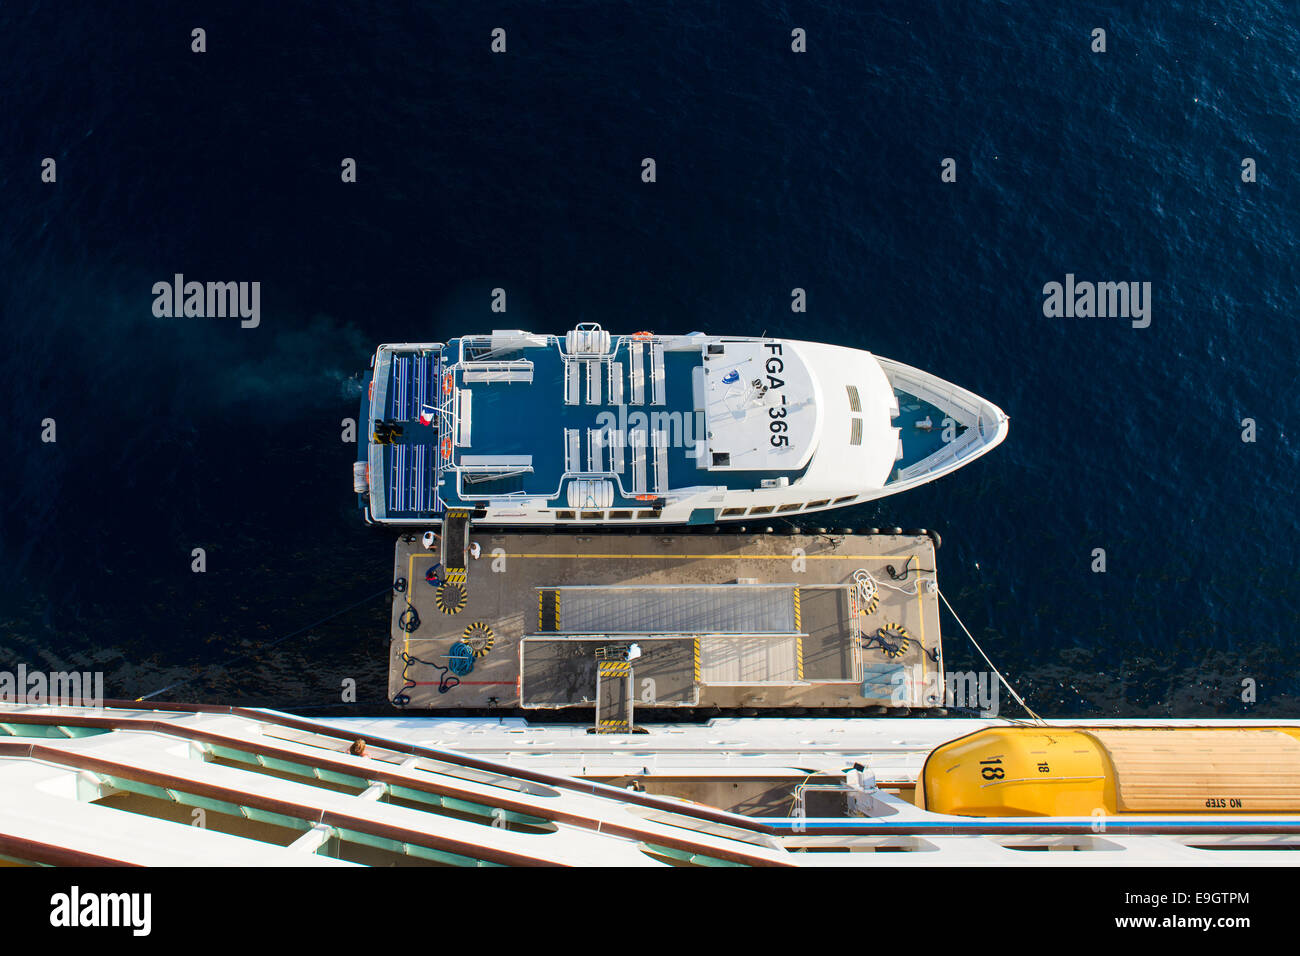 A tender boat awaits passengers to take to shore in Cannes, France, from Royal Caribbean's cruise ship Adventure Of The Seas Stock Photo